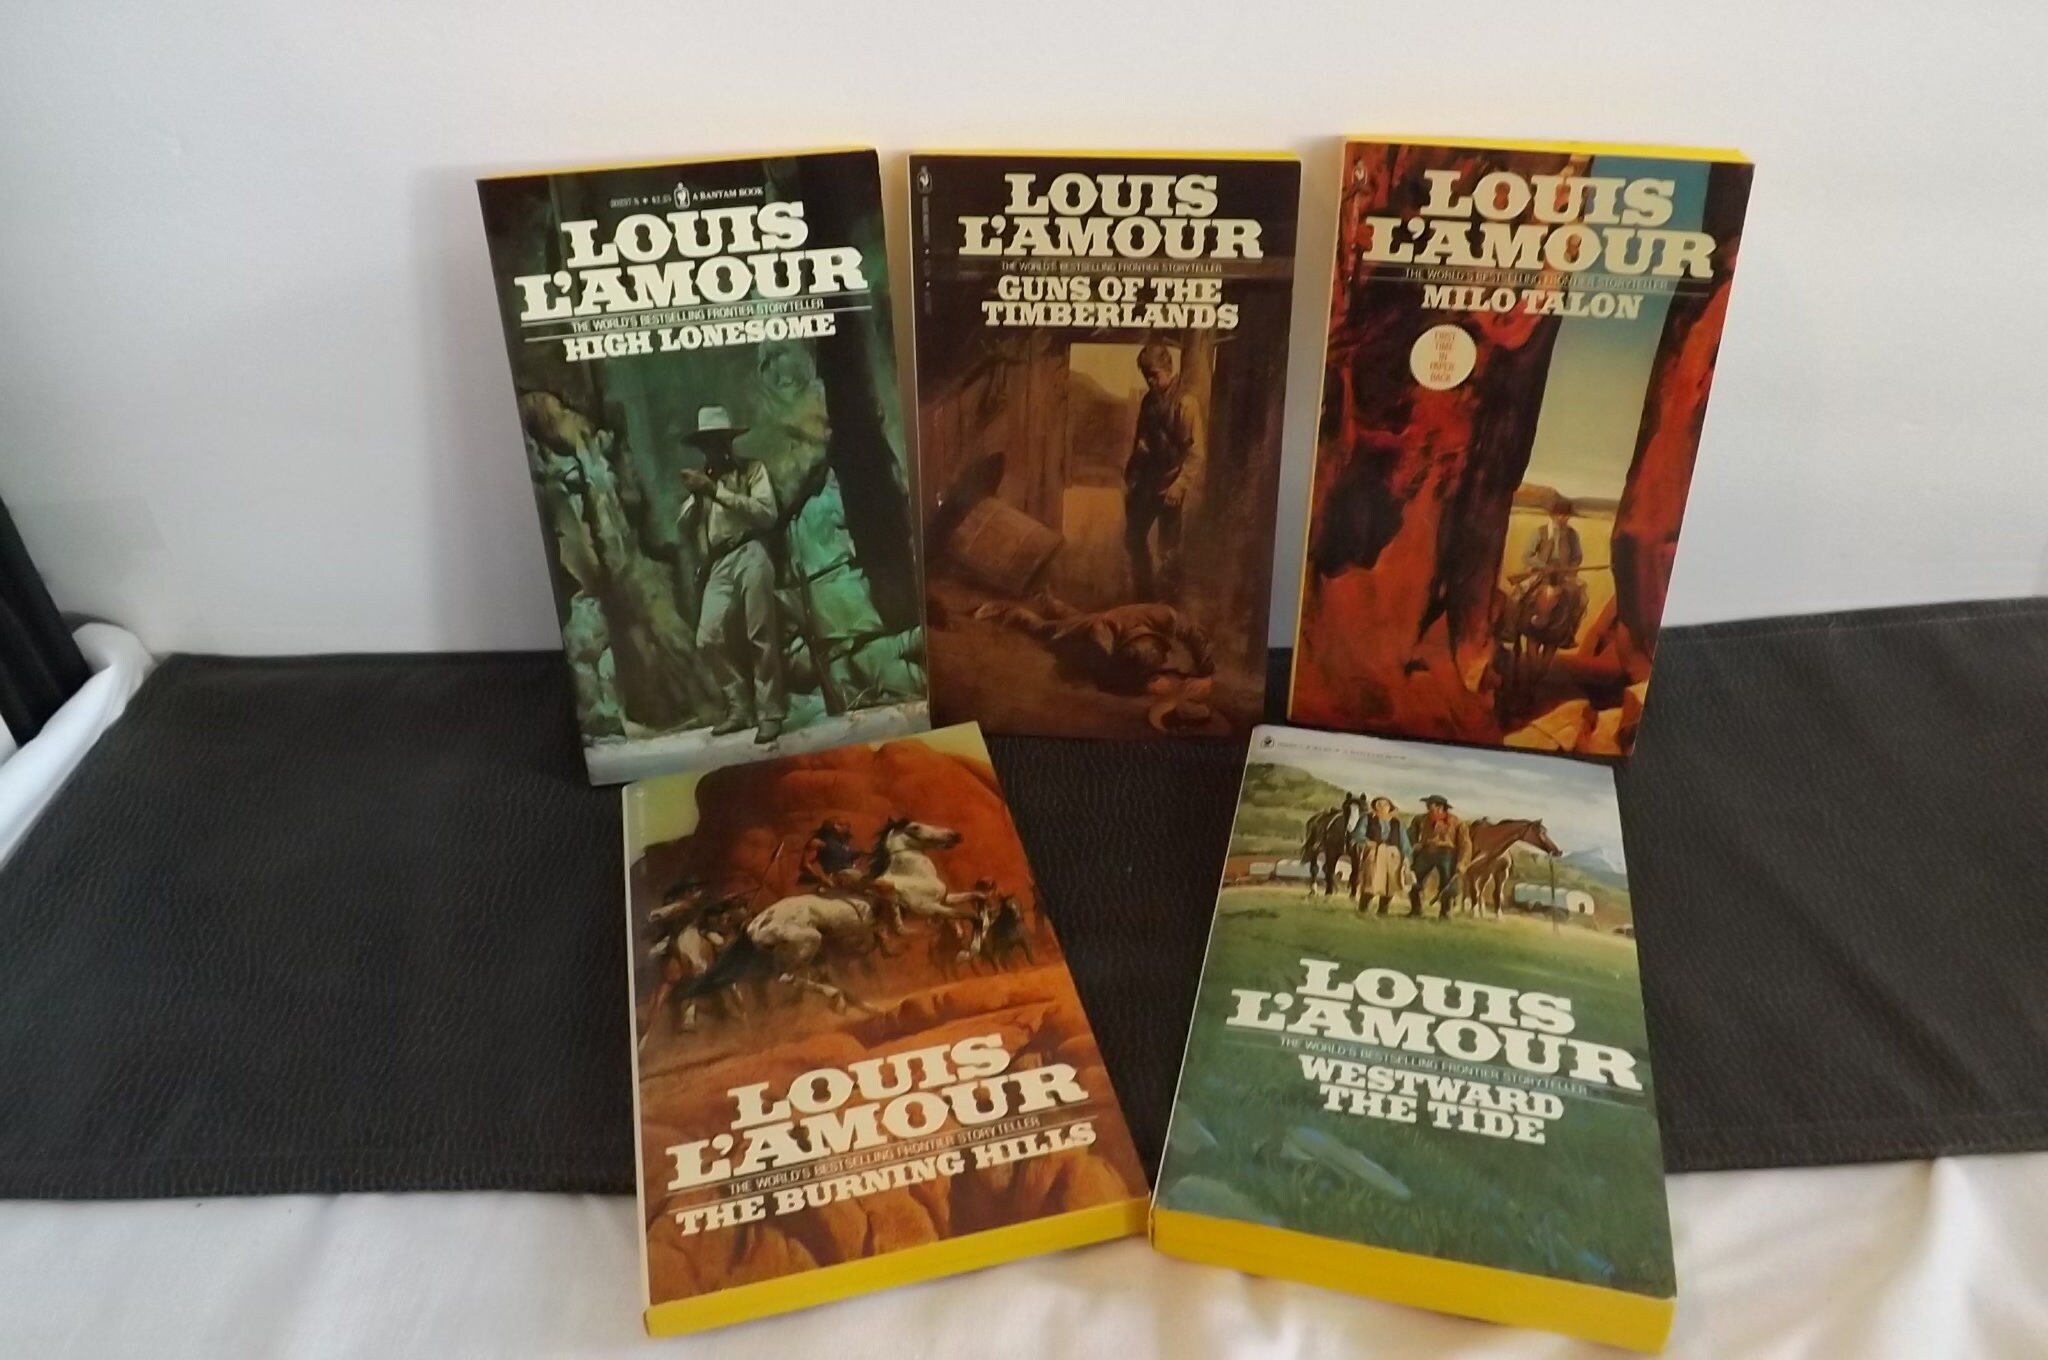 The Burning Hills by Louis L'Amour